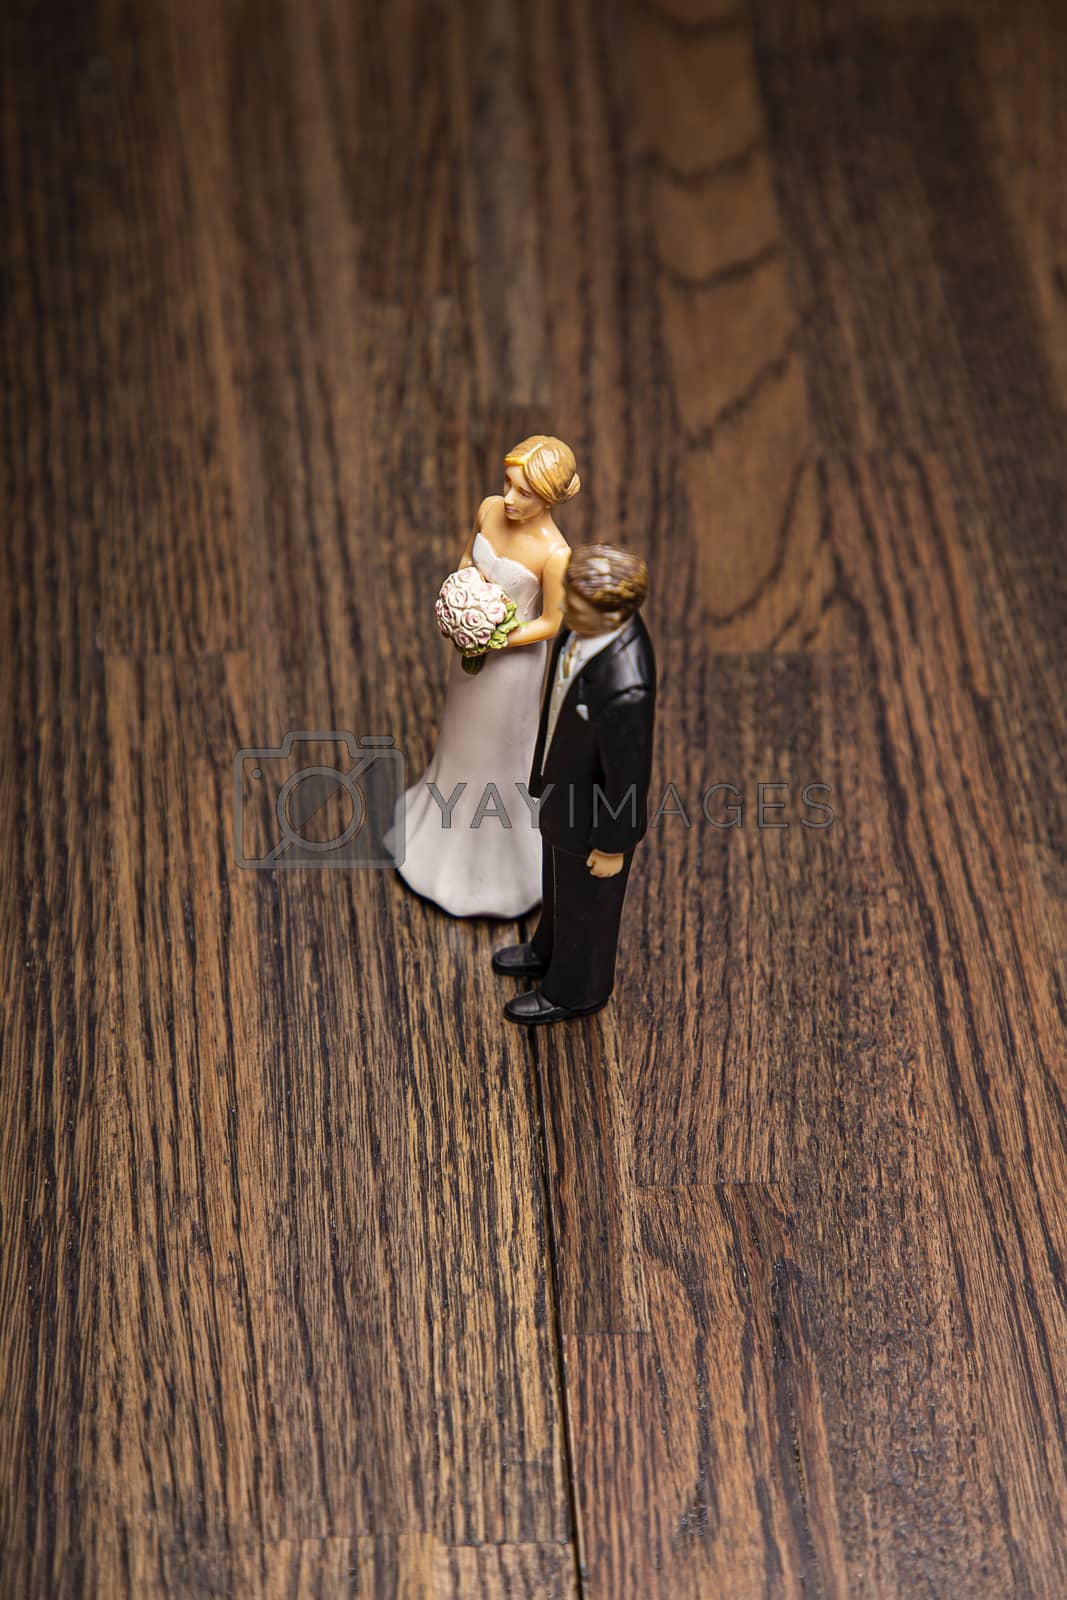 Royalty free image of Married couple figurine by mypstudio